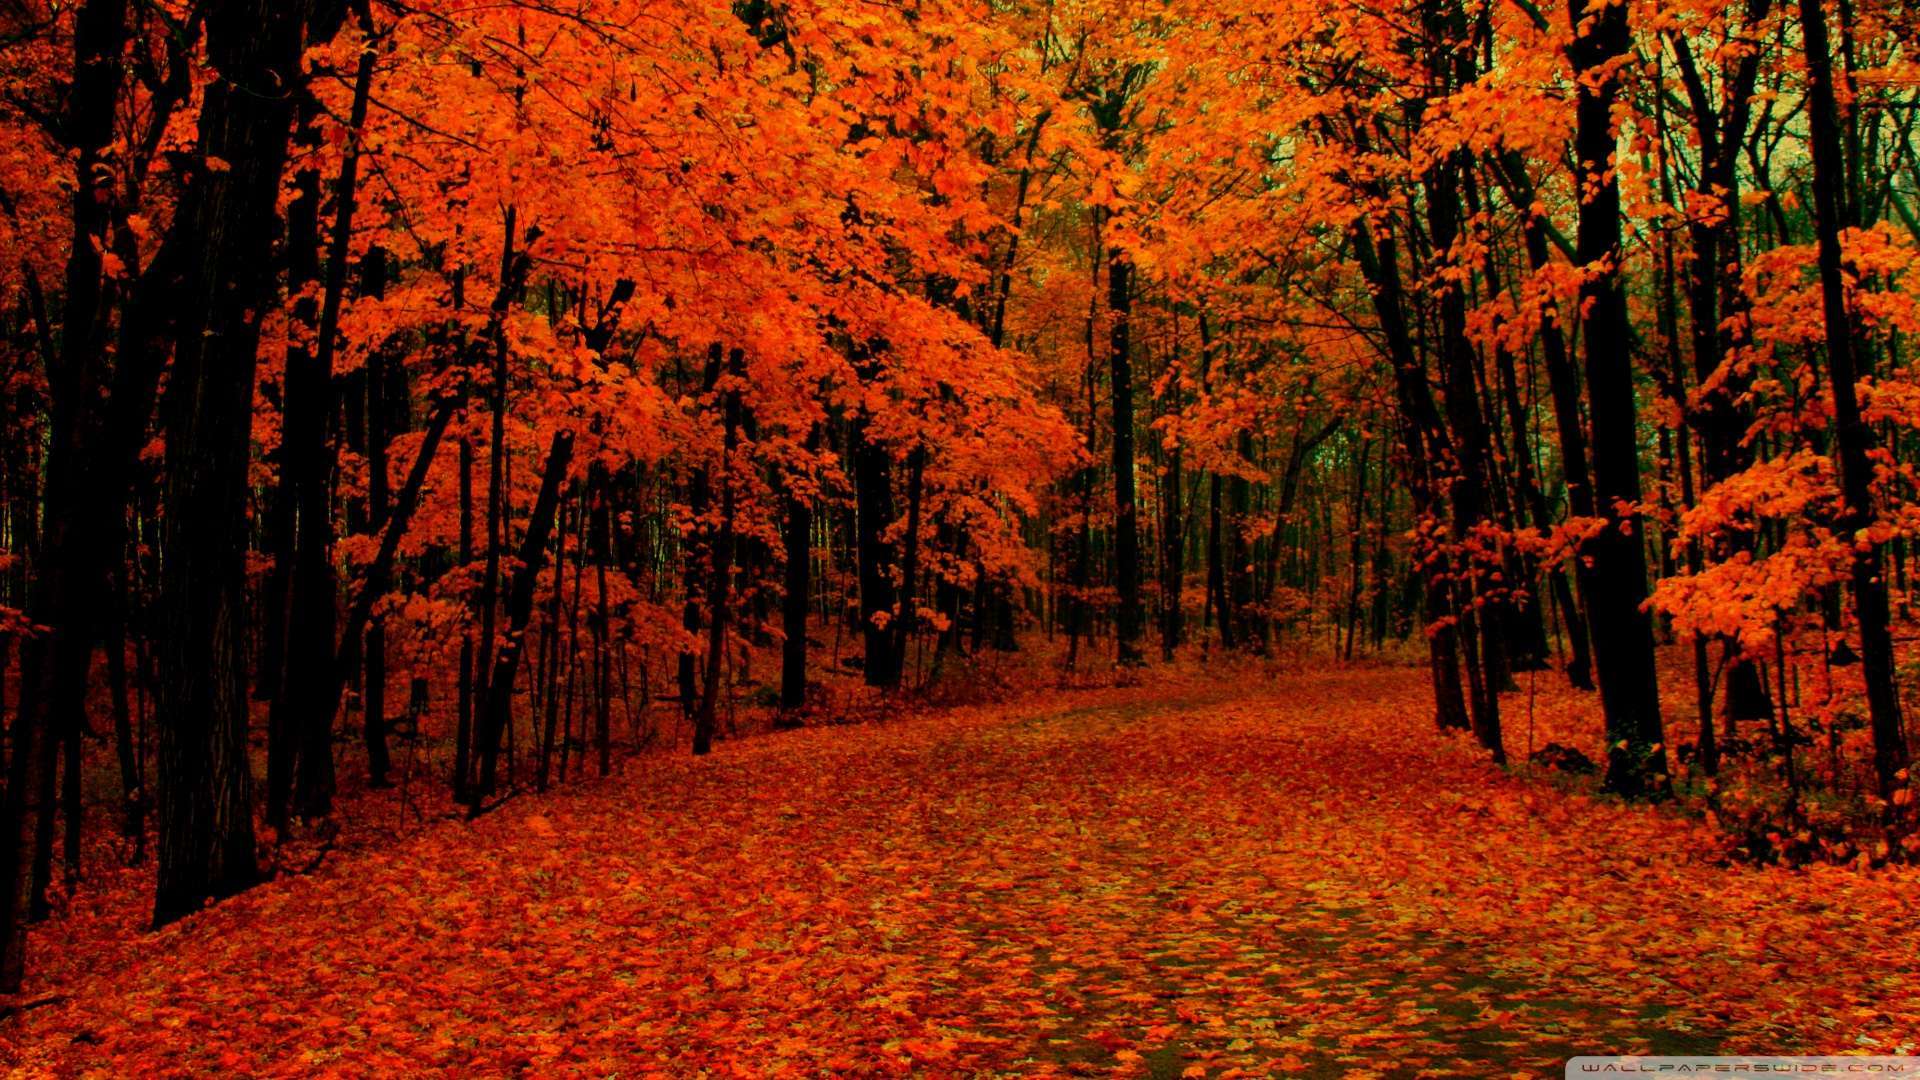 Wallpaper Fall Path Wallpaper 1080p HD Upload at February 2 2014 by